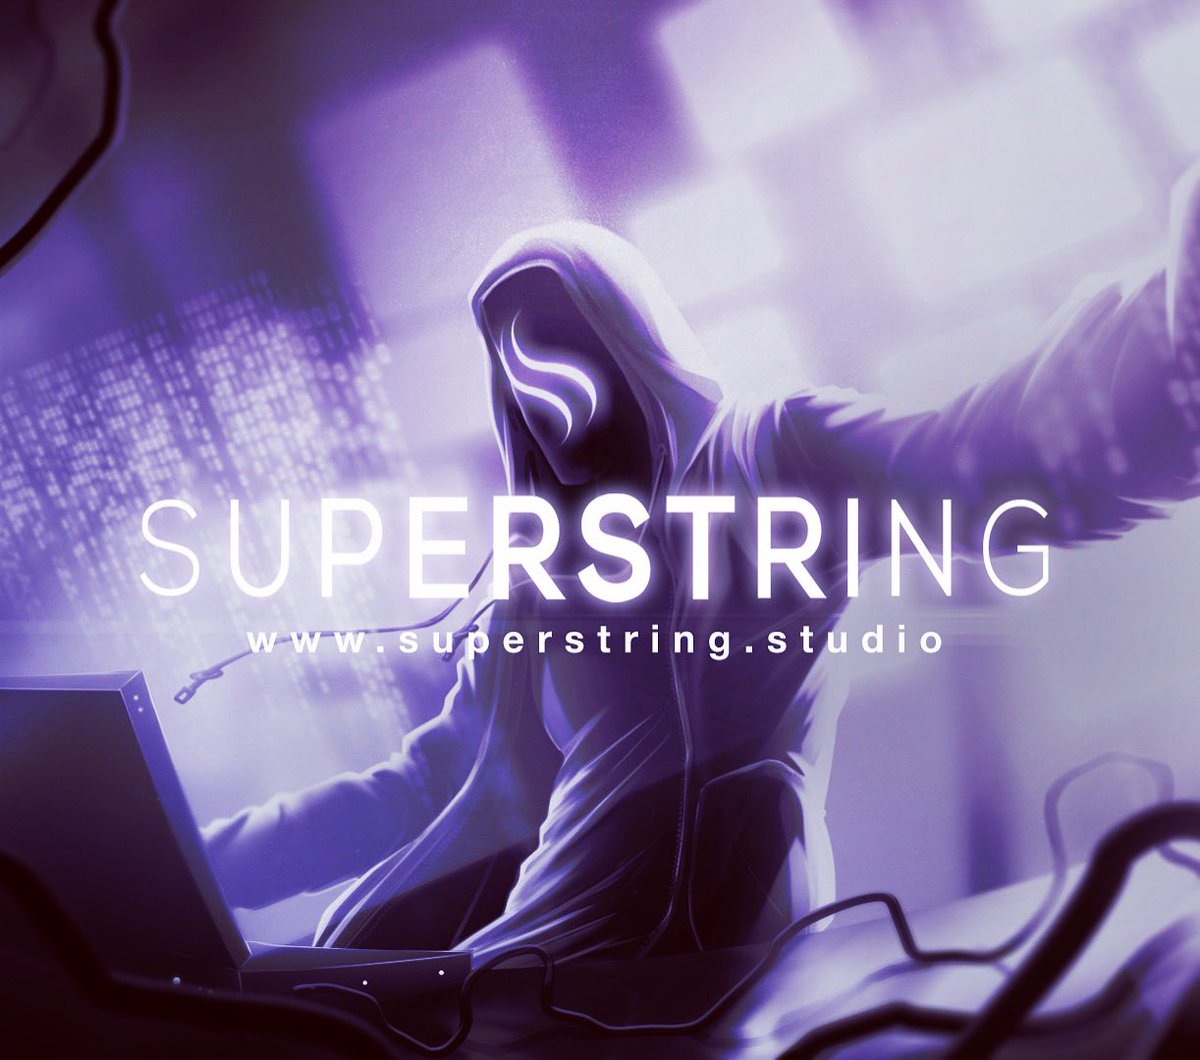 alrighty, we’re about to take a big step forward in the development of our new game, as we open doors to an early playtest 🎮 If you’re into SRPGs/management games, register your interest by joining our mailing list - sign up details will be sent SOON 👇 superstring.studio/mailing-list